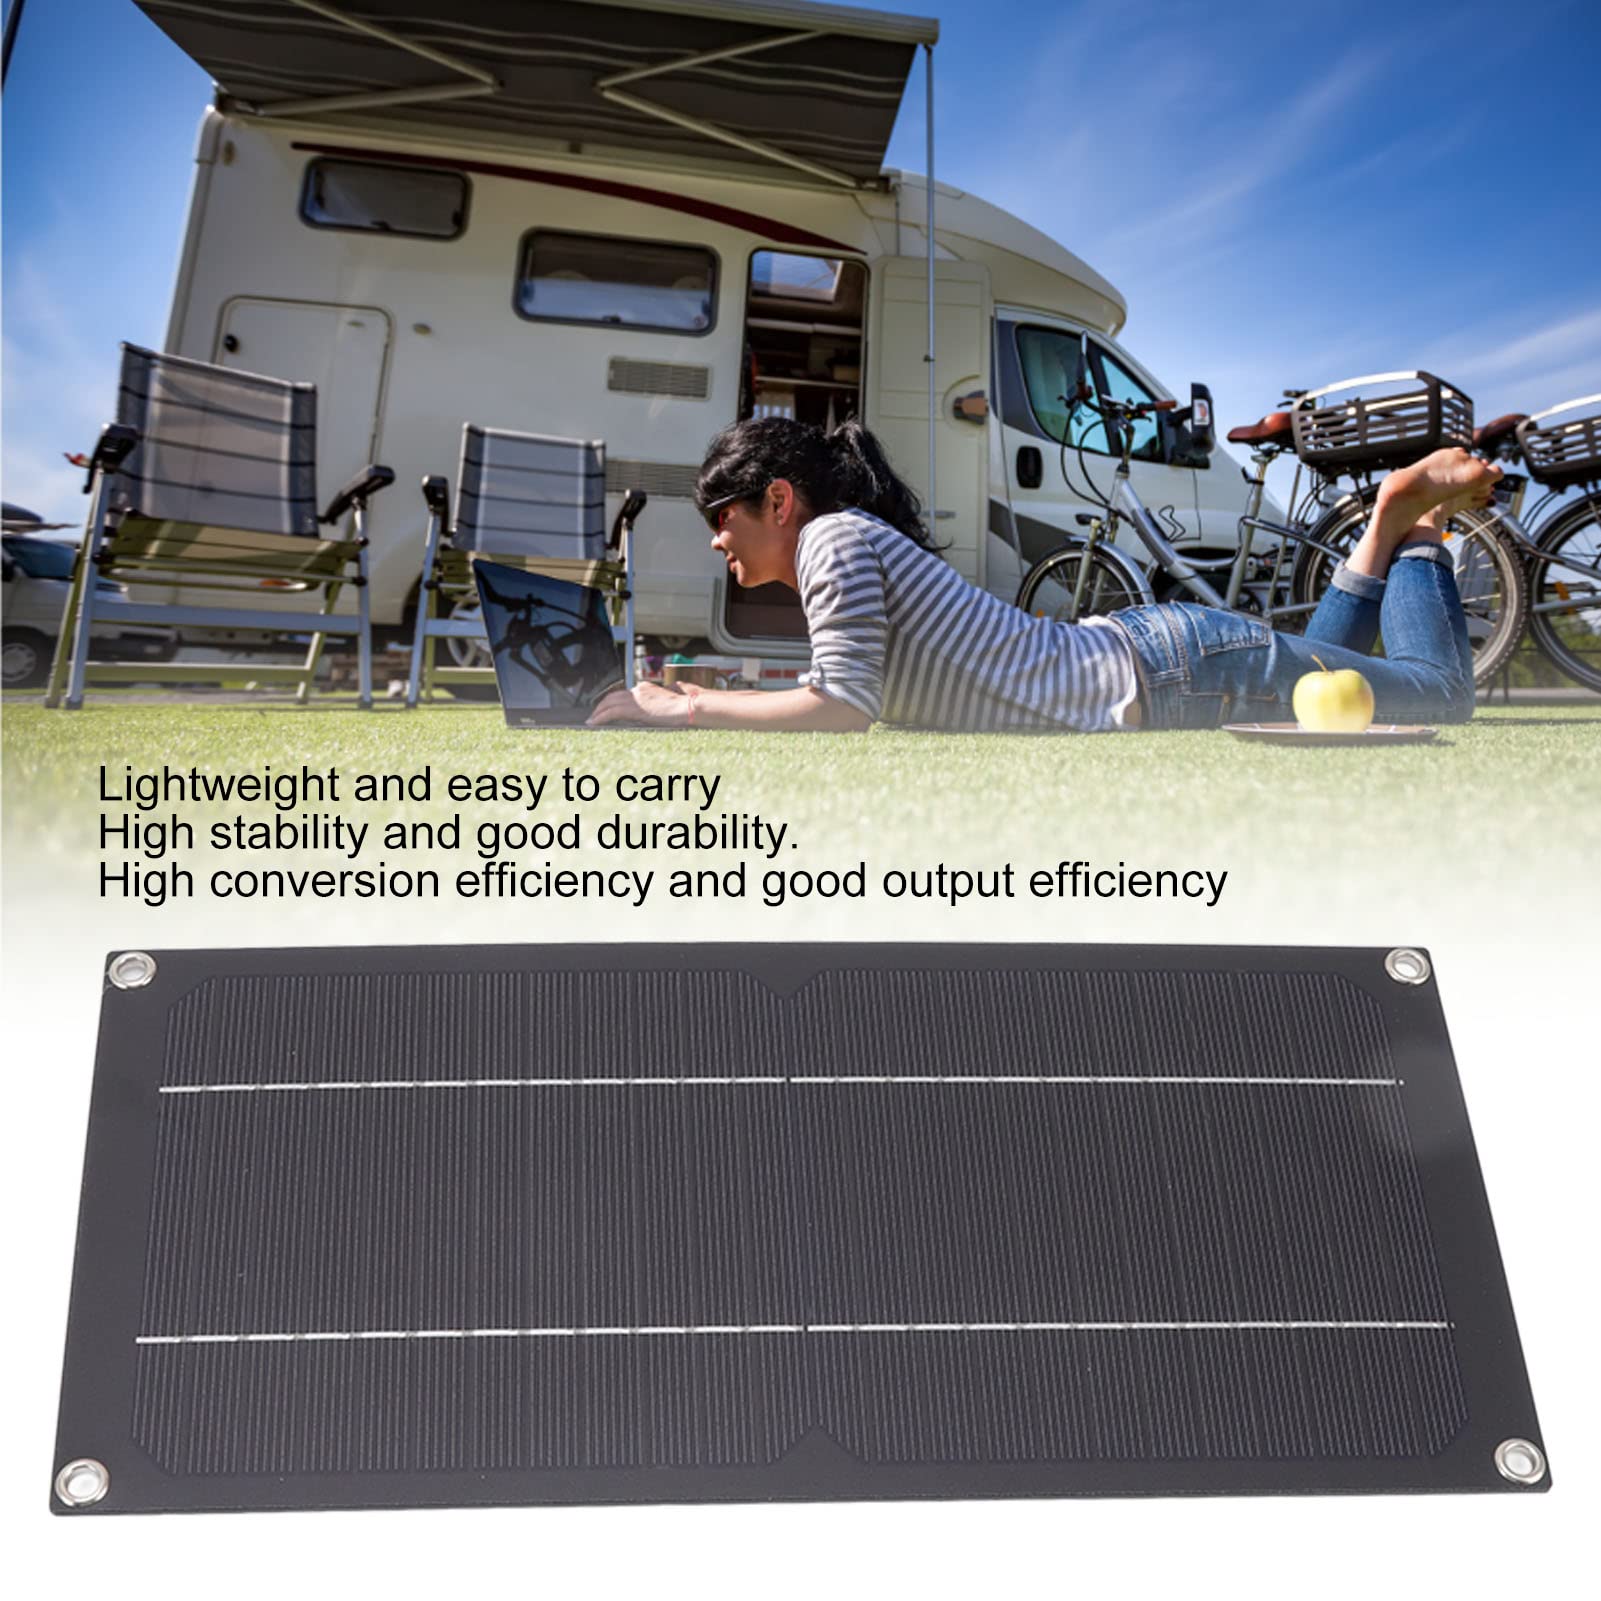 600W 18V Portable Solar Panel 100A Battery Charger Controller Battery Charging KitSolar Panel Kit for Outdoor Farming Camping Trailer Solar Panels